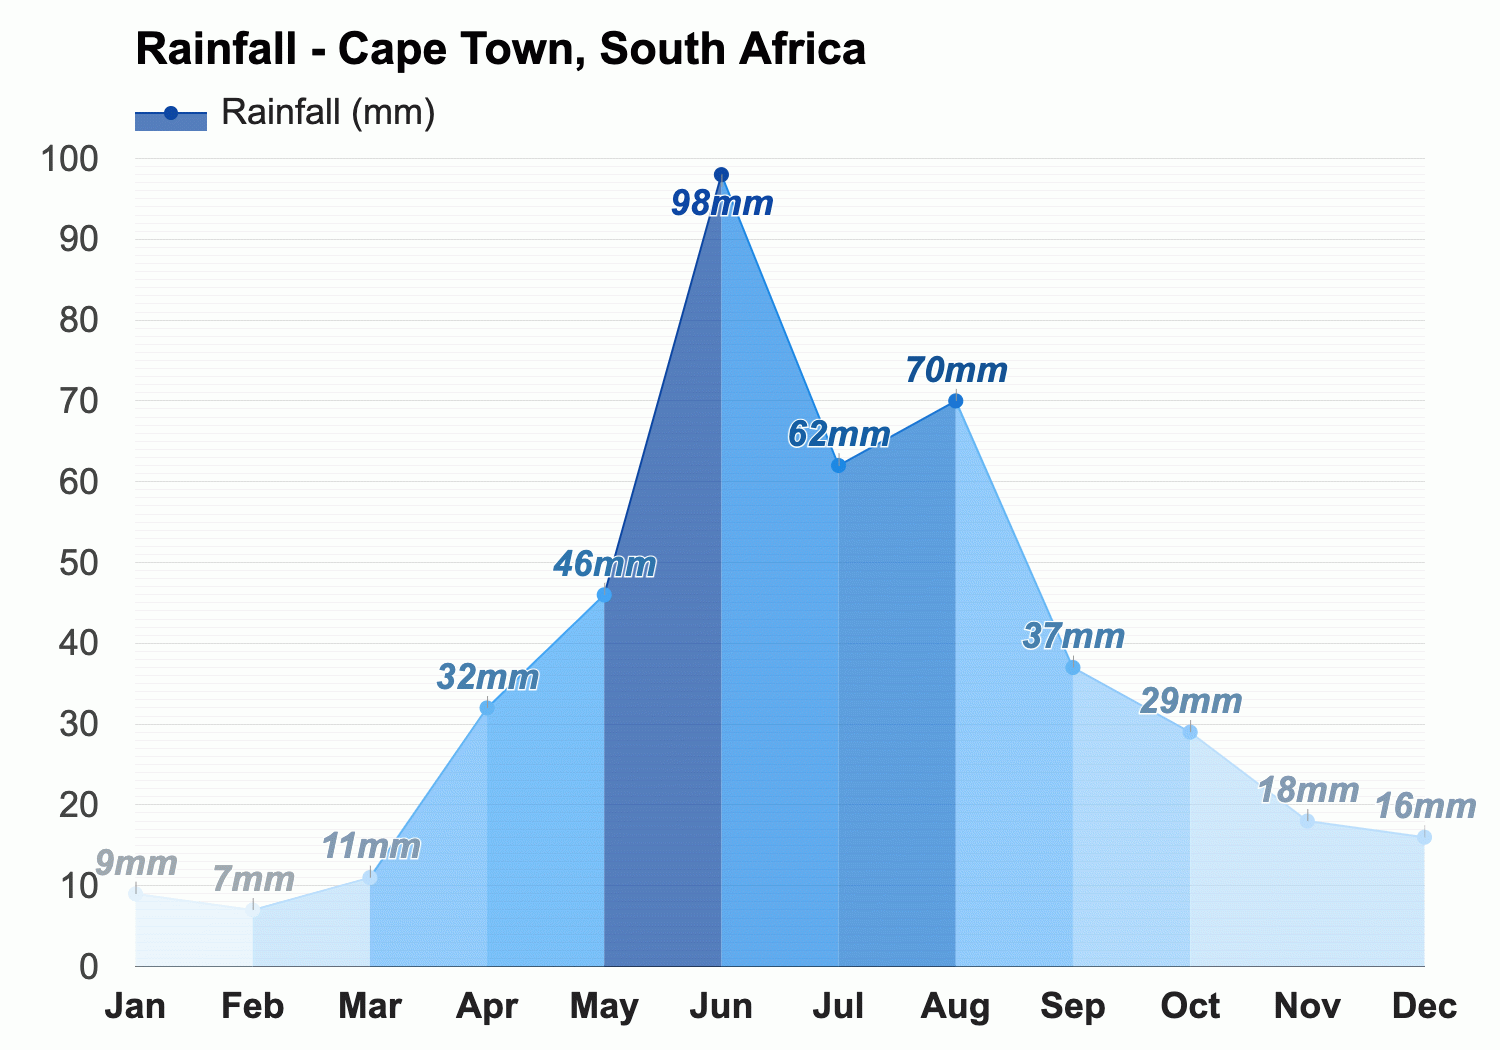 Cape Town, South Africa - Detailed climate information and monthly weather  forecast | Weather Atlas